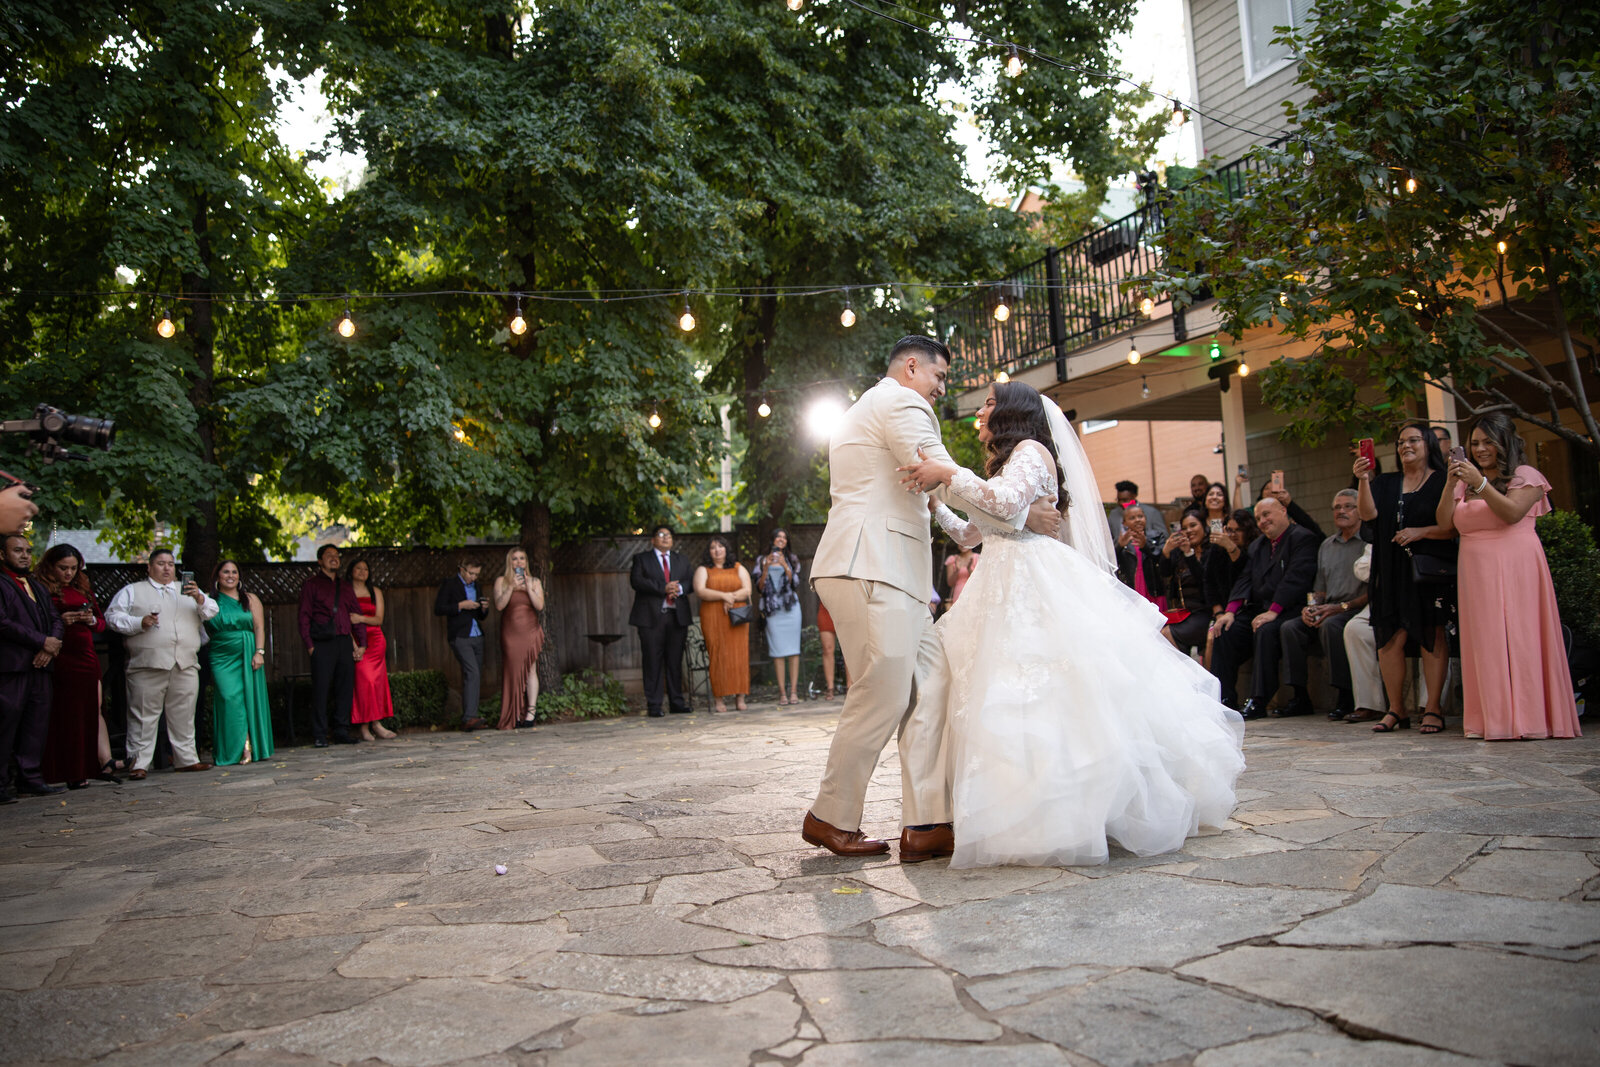 Bride and groom dancing in the courtyard of forest house lodge, sacramento wedding venue.